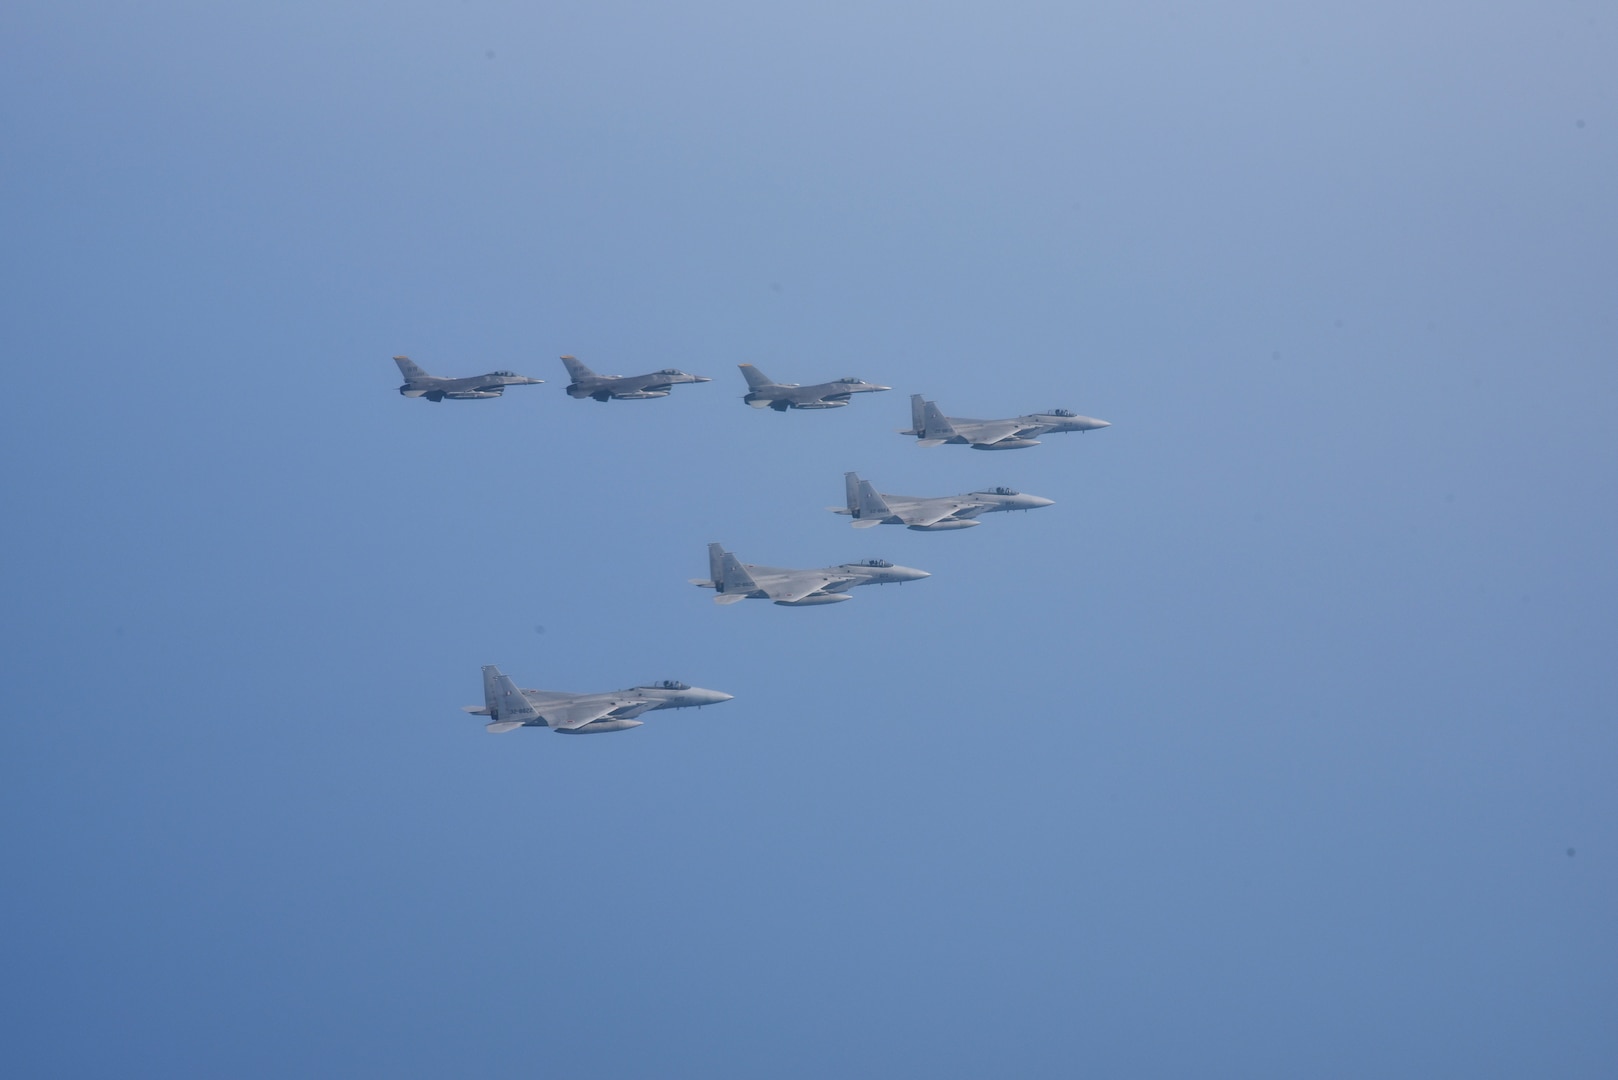 U.S. Indo-Pacific Command aircraft conducted a bilateral exercise with Japan
Air Self-Defense Forces 25 May, 2022.